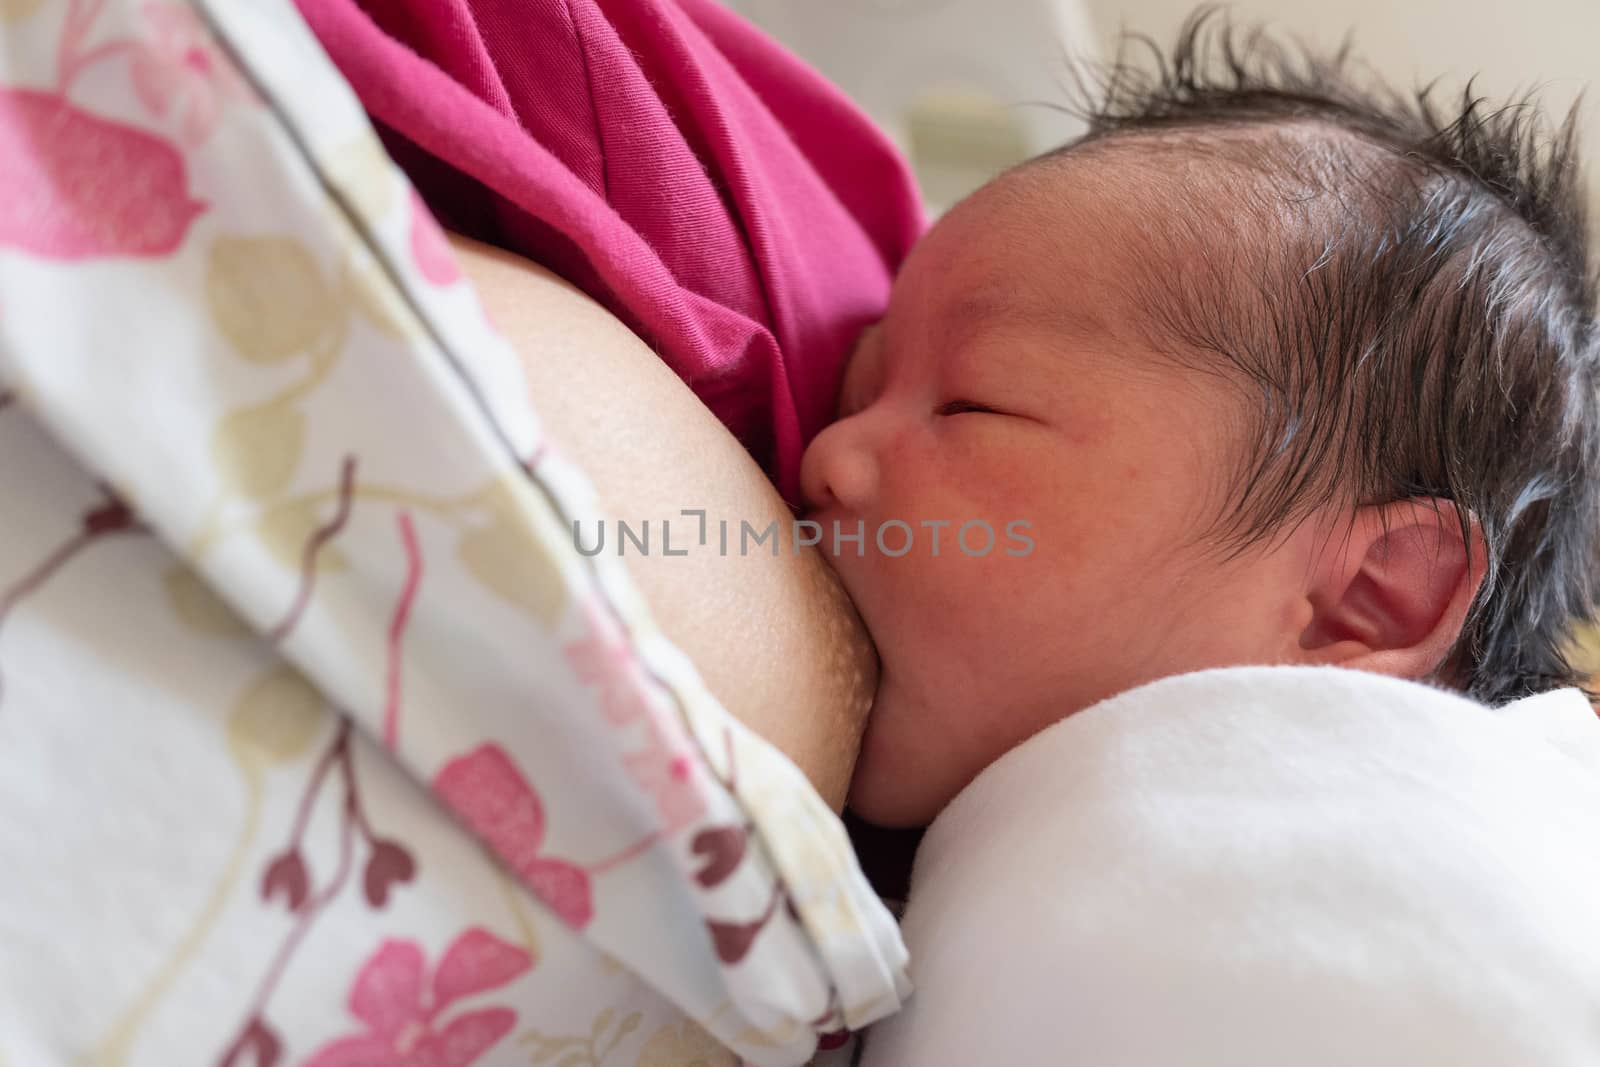 Feeding mother breast milk with the  new born baby on hands
 by Bonn2210